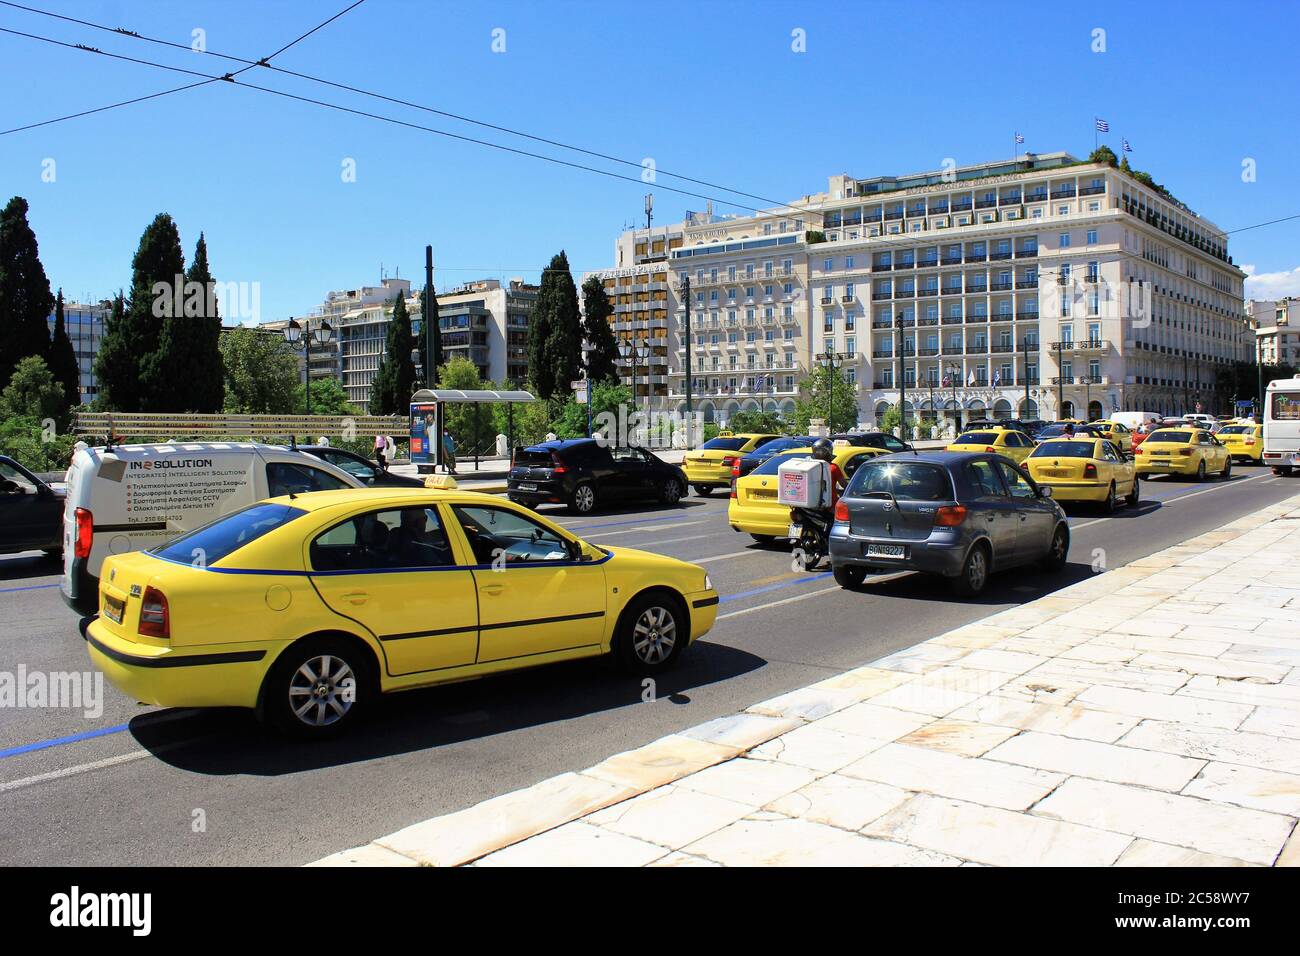 Greece, Athens, June 16 2020 - Heavy traffic on Amalias avenue with the Grande Bretagne hotel in the background. Stock Photo